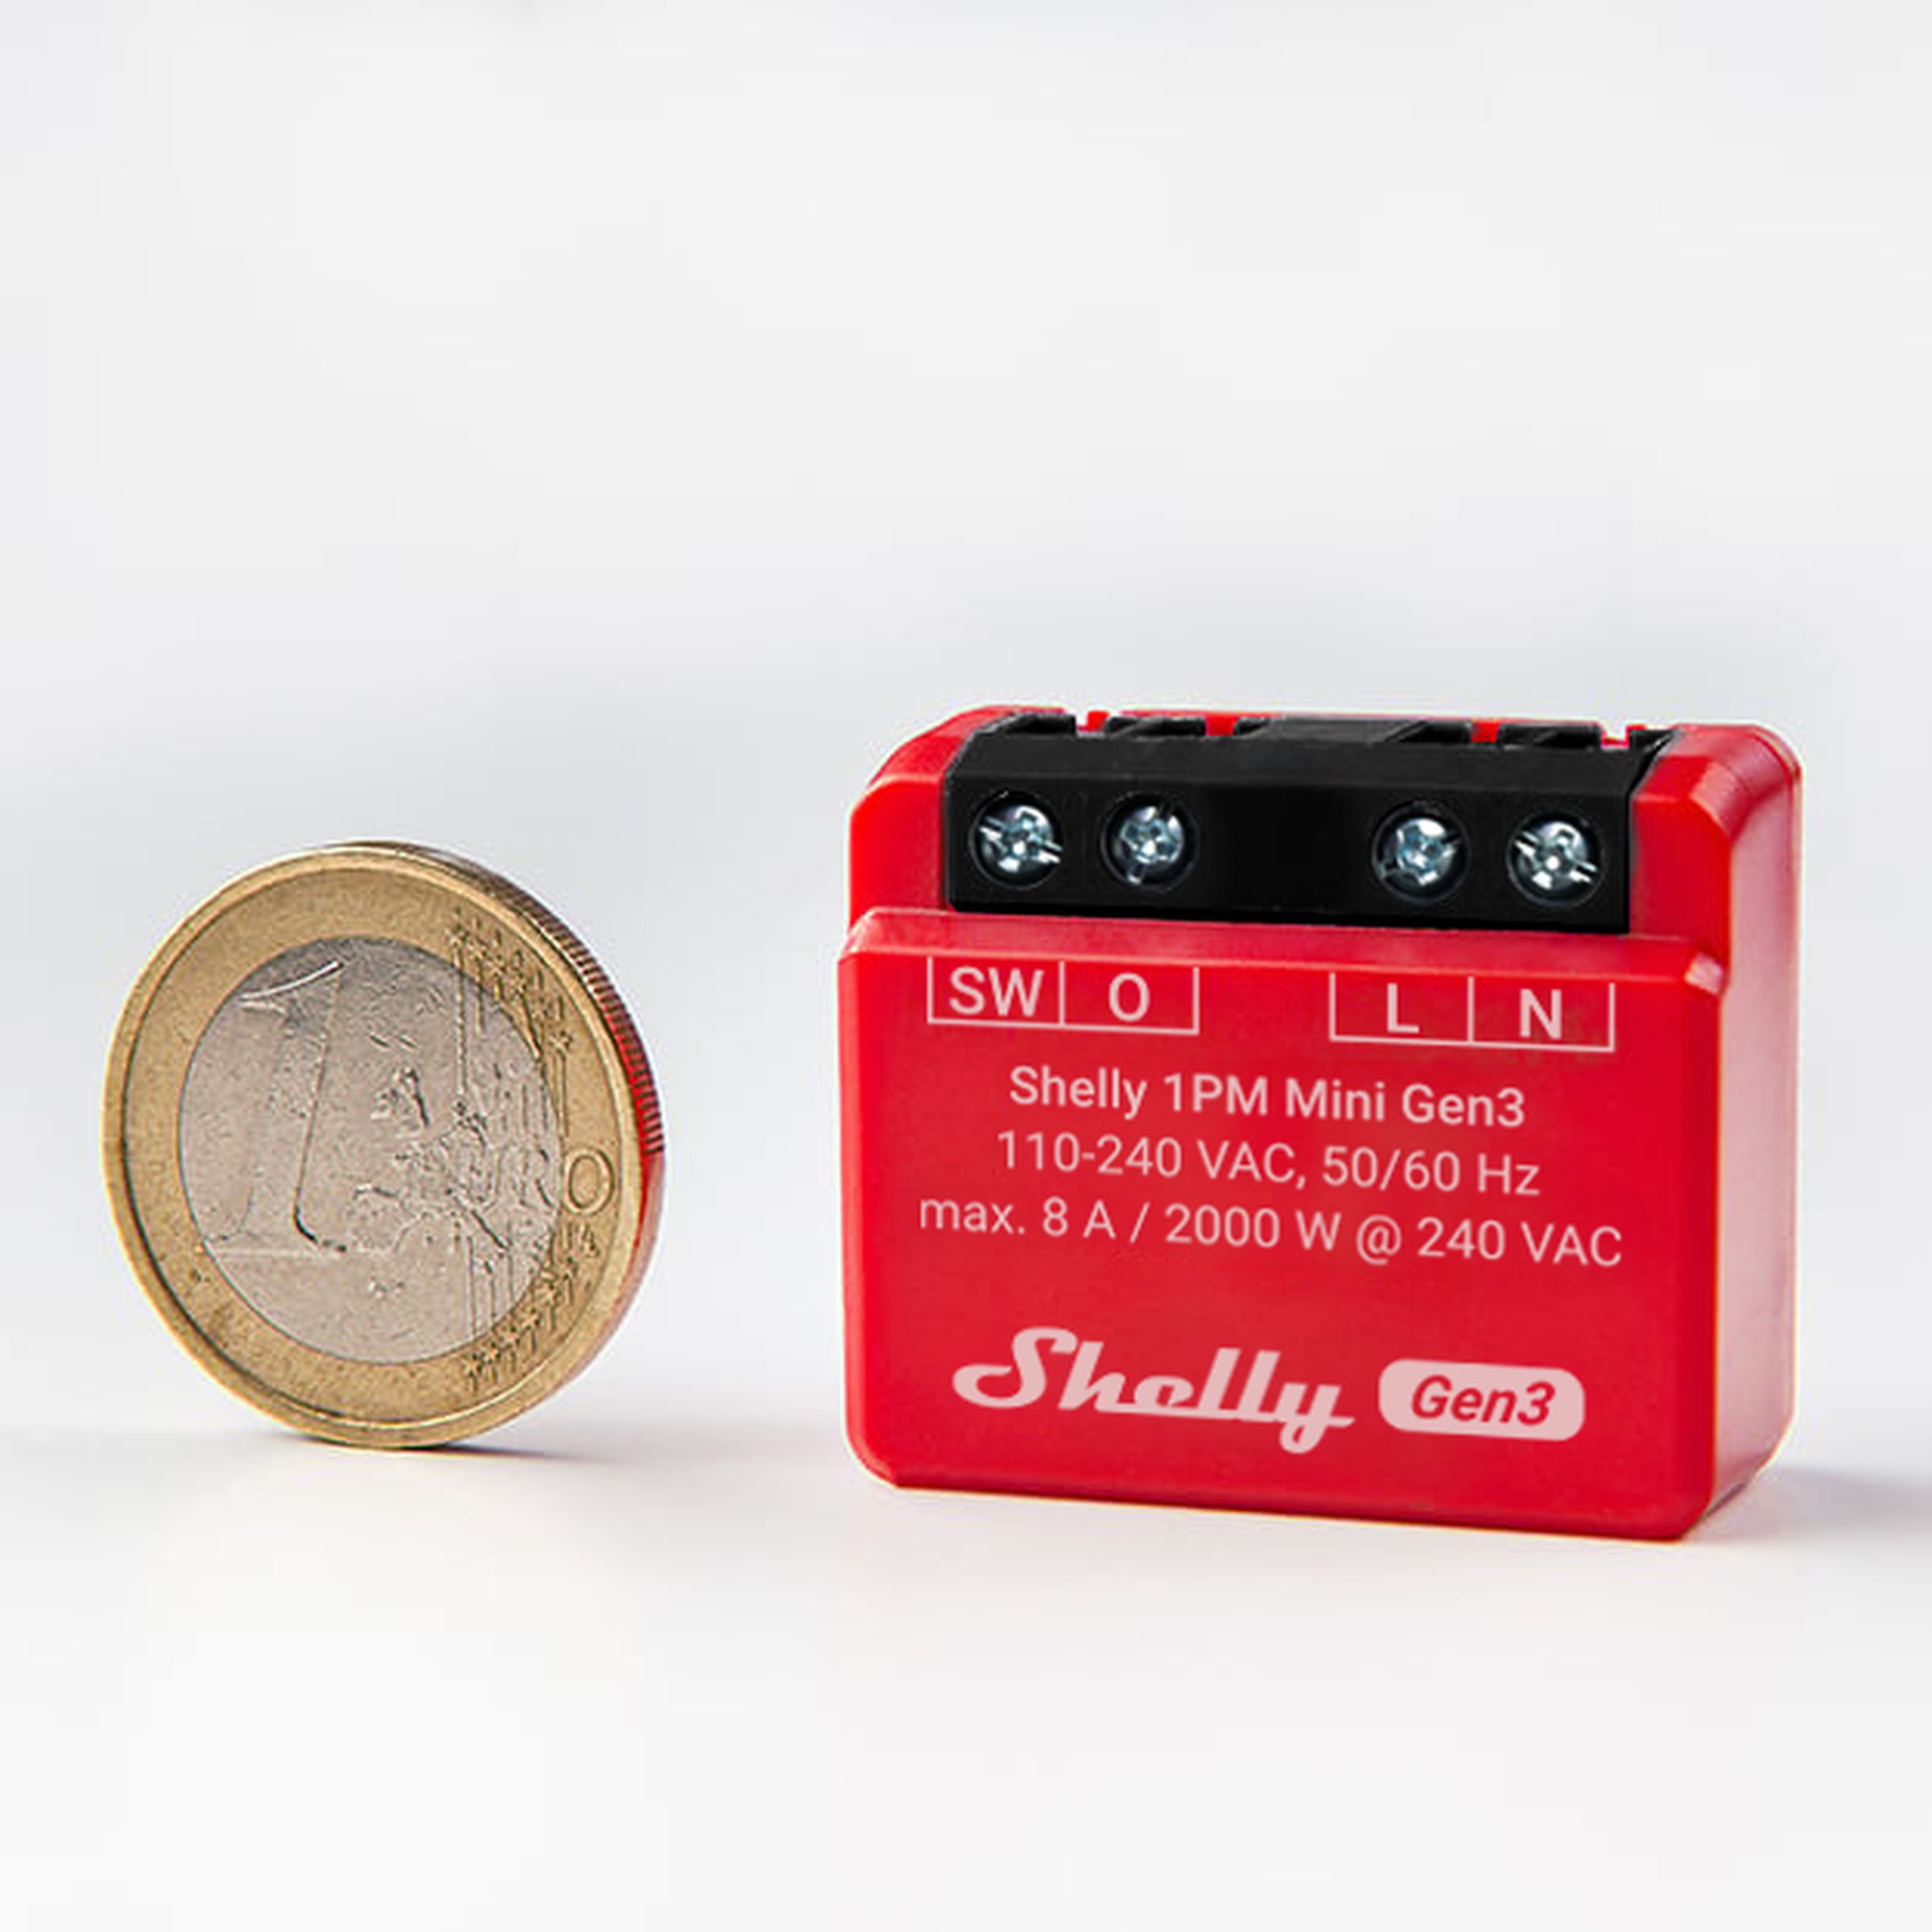 Shelly’s latest in-wall relay is one of the world’s smallest smart switches.